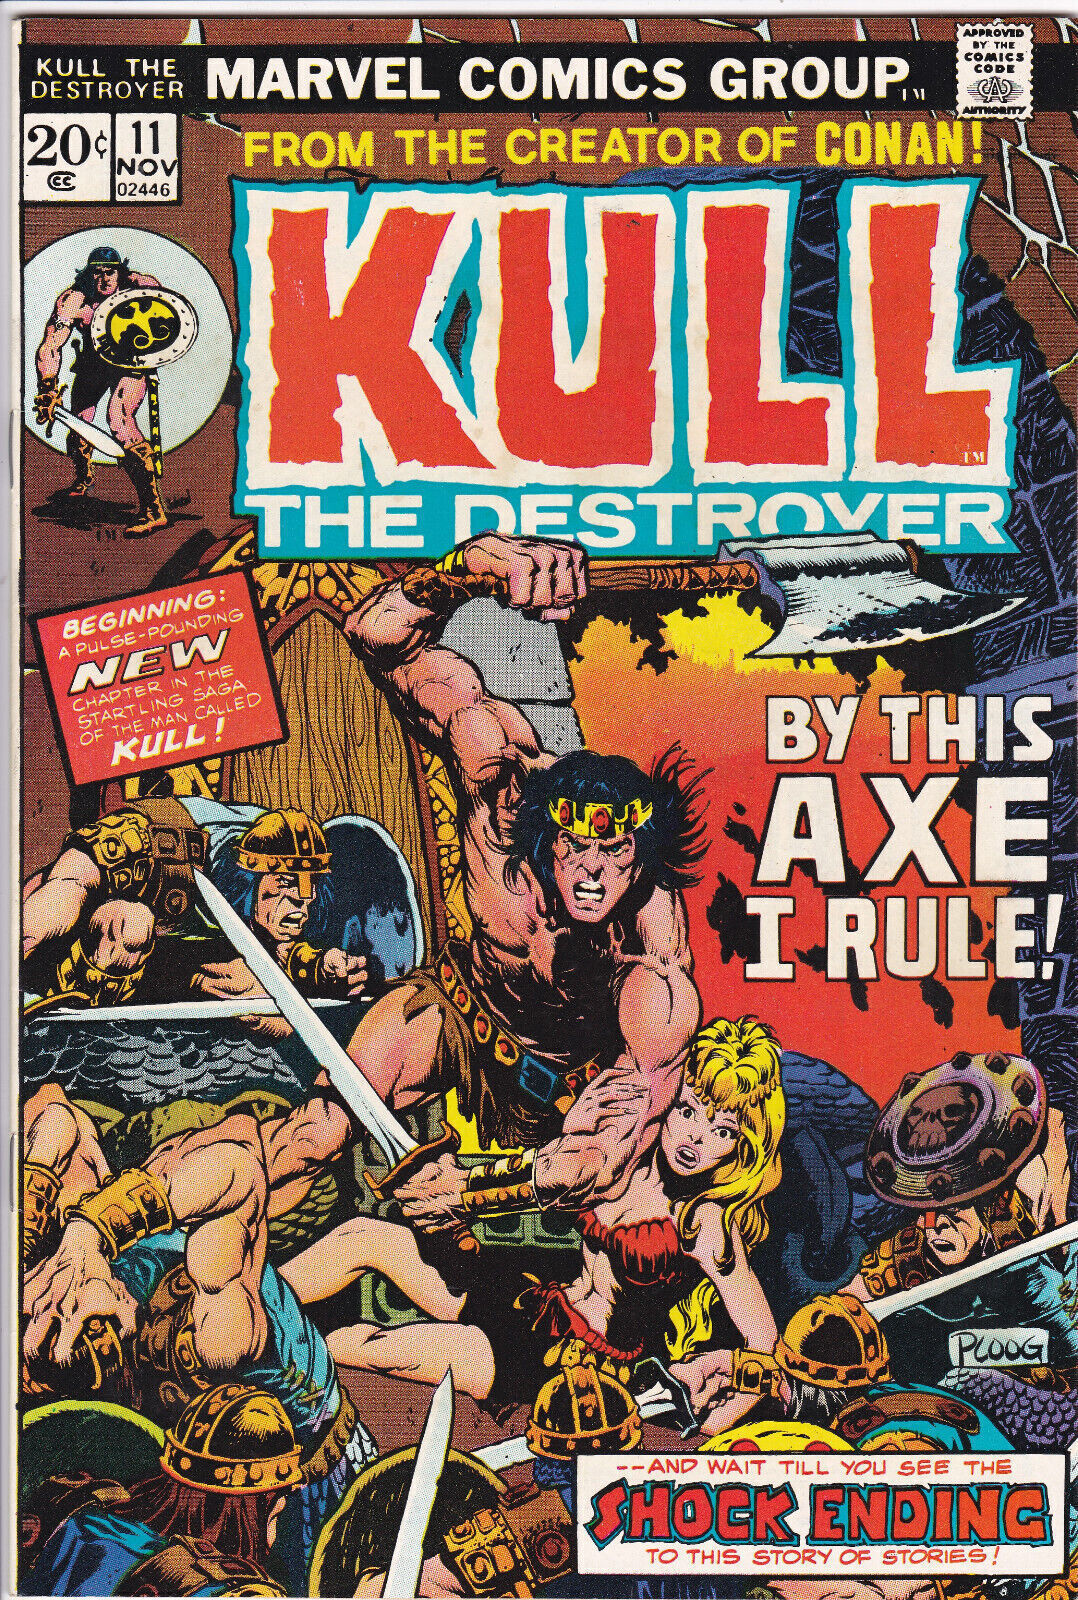 Kull the Destroyer #11 Vol. 1 (1974-1978) Marvel Comics,First Issue